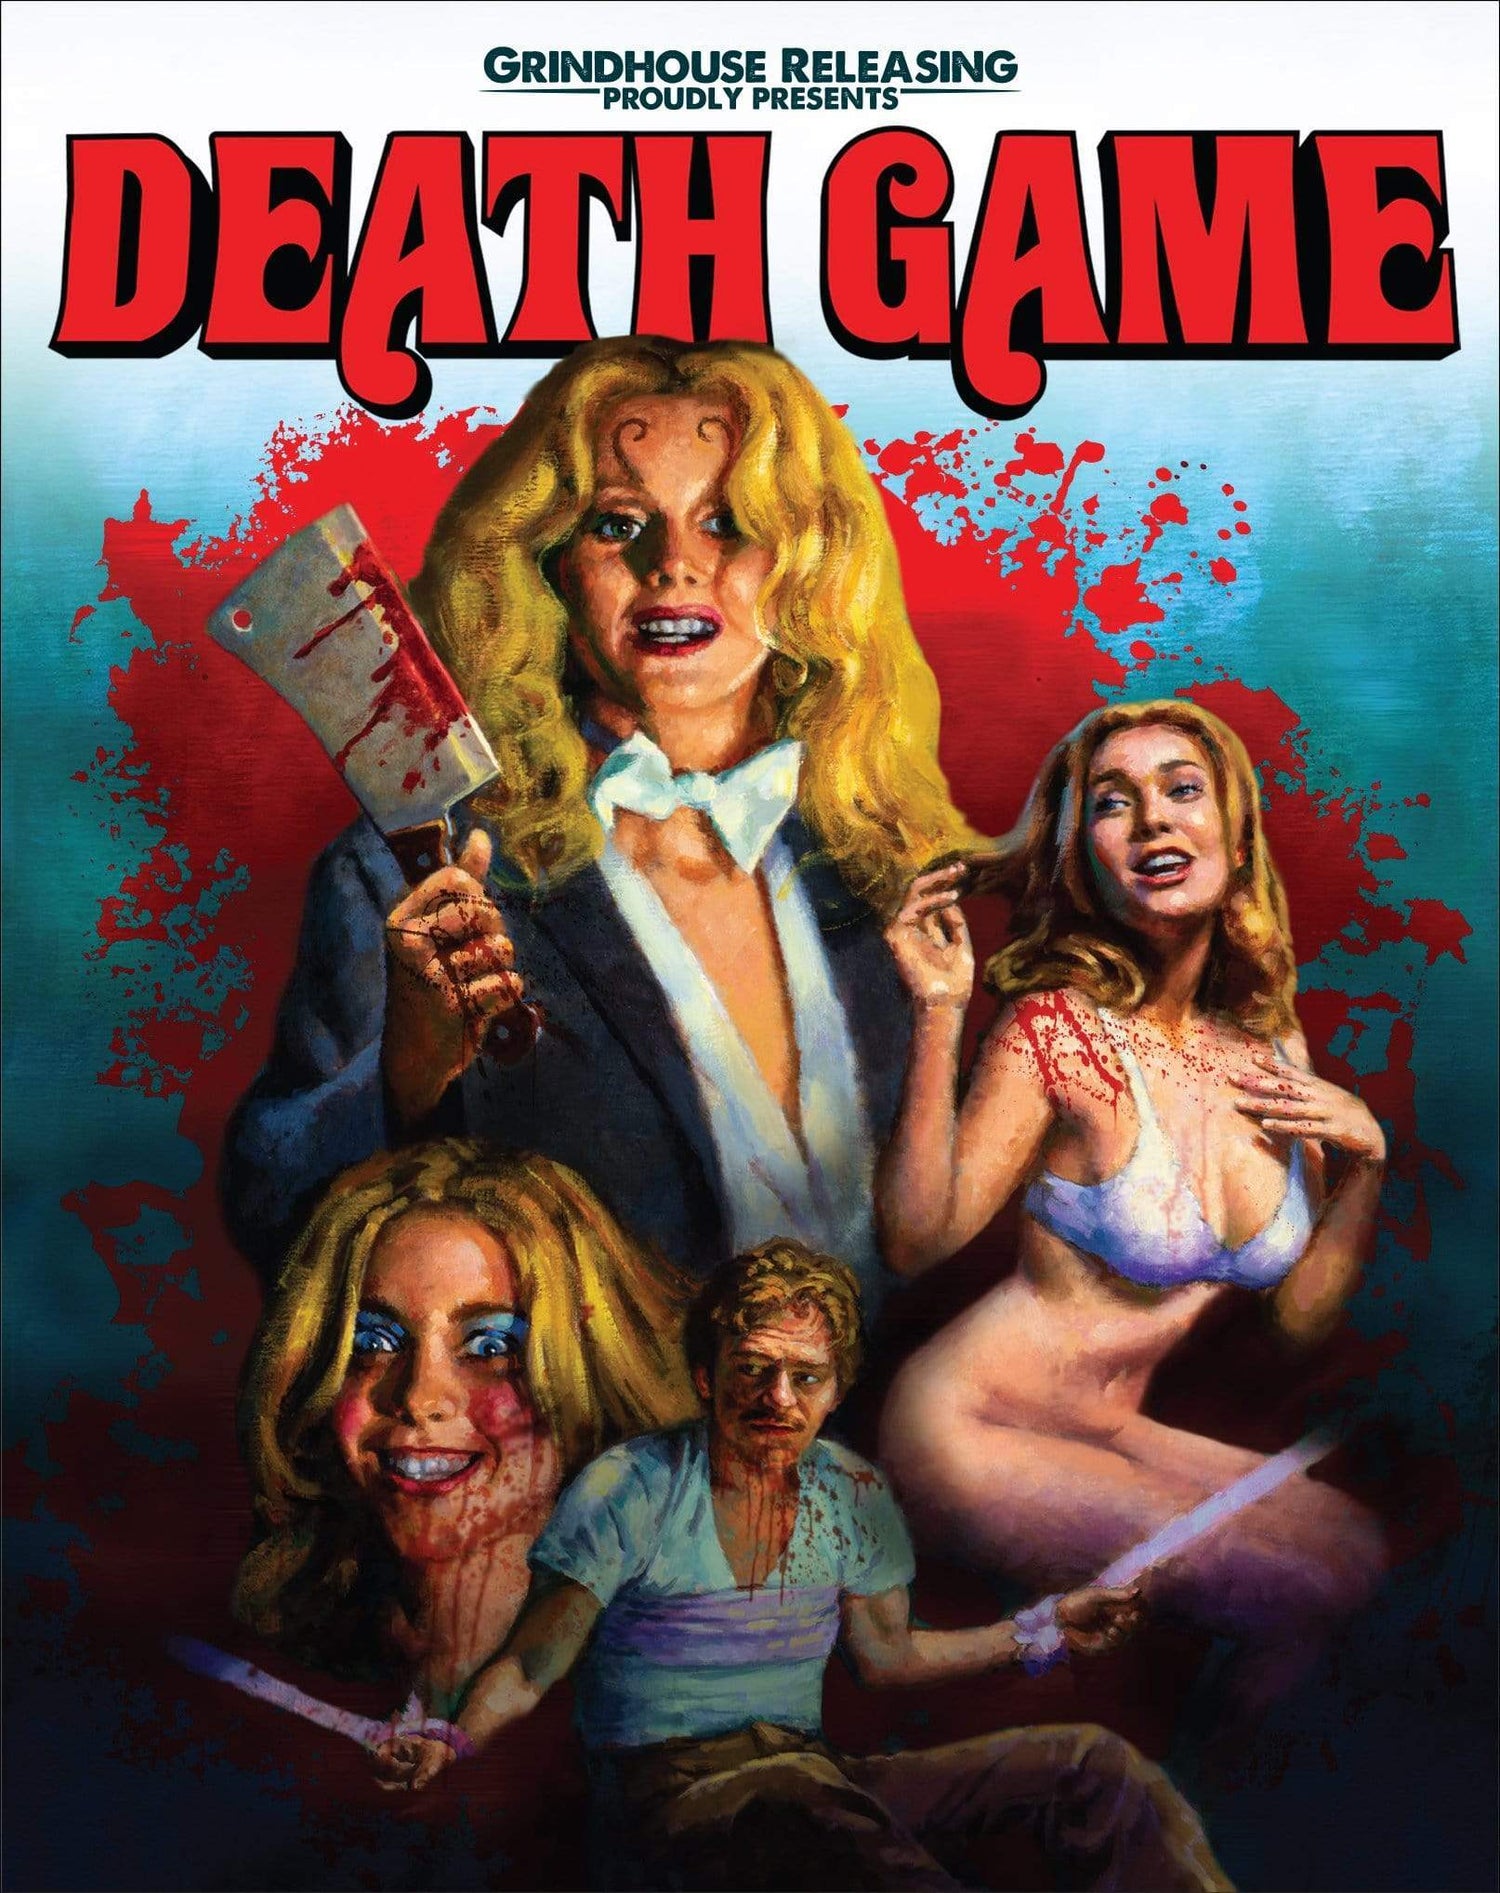 DEATH GAME (1977) 2 disc Blu-ray Set: Embossed Slipcover from Grindhouse Releasing directed by Peter Traynor, starring Sondra Locke, Collen Camp and Seymour Cassel